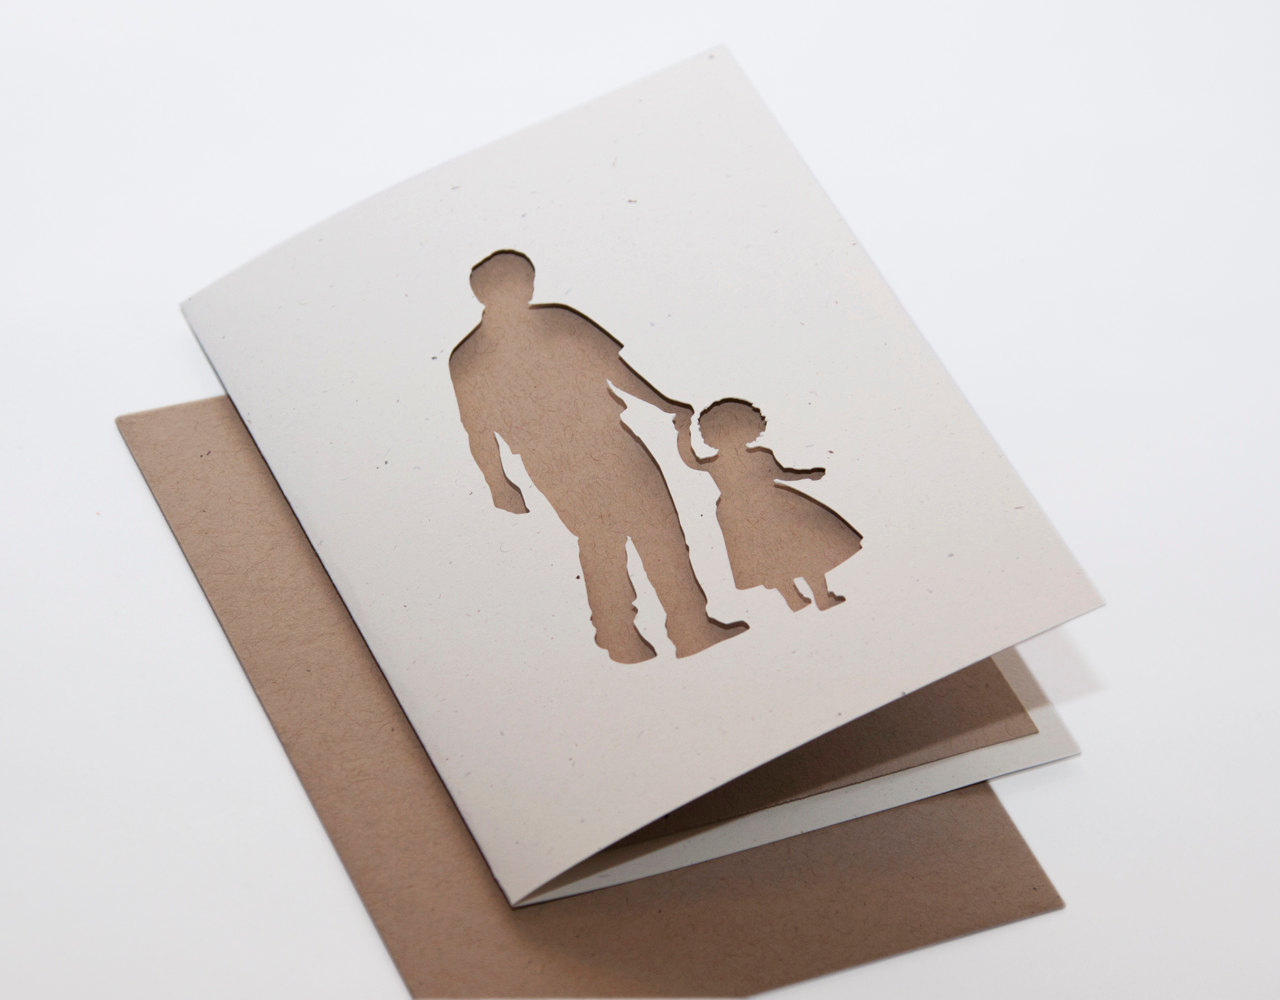 Handmade Birthday Card Ideas For Father Birthday Cards For Dad From Daughter Ideas 5 Happy World Handmade